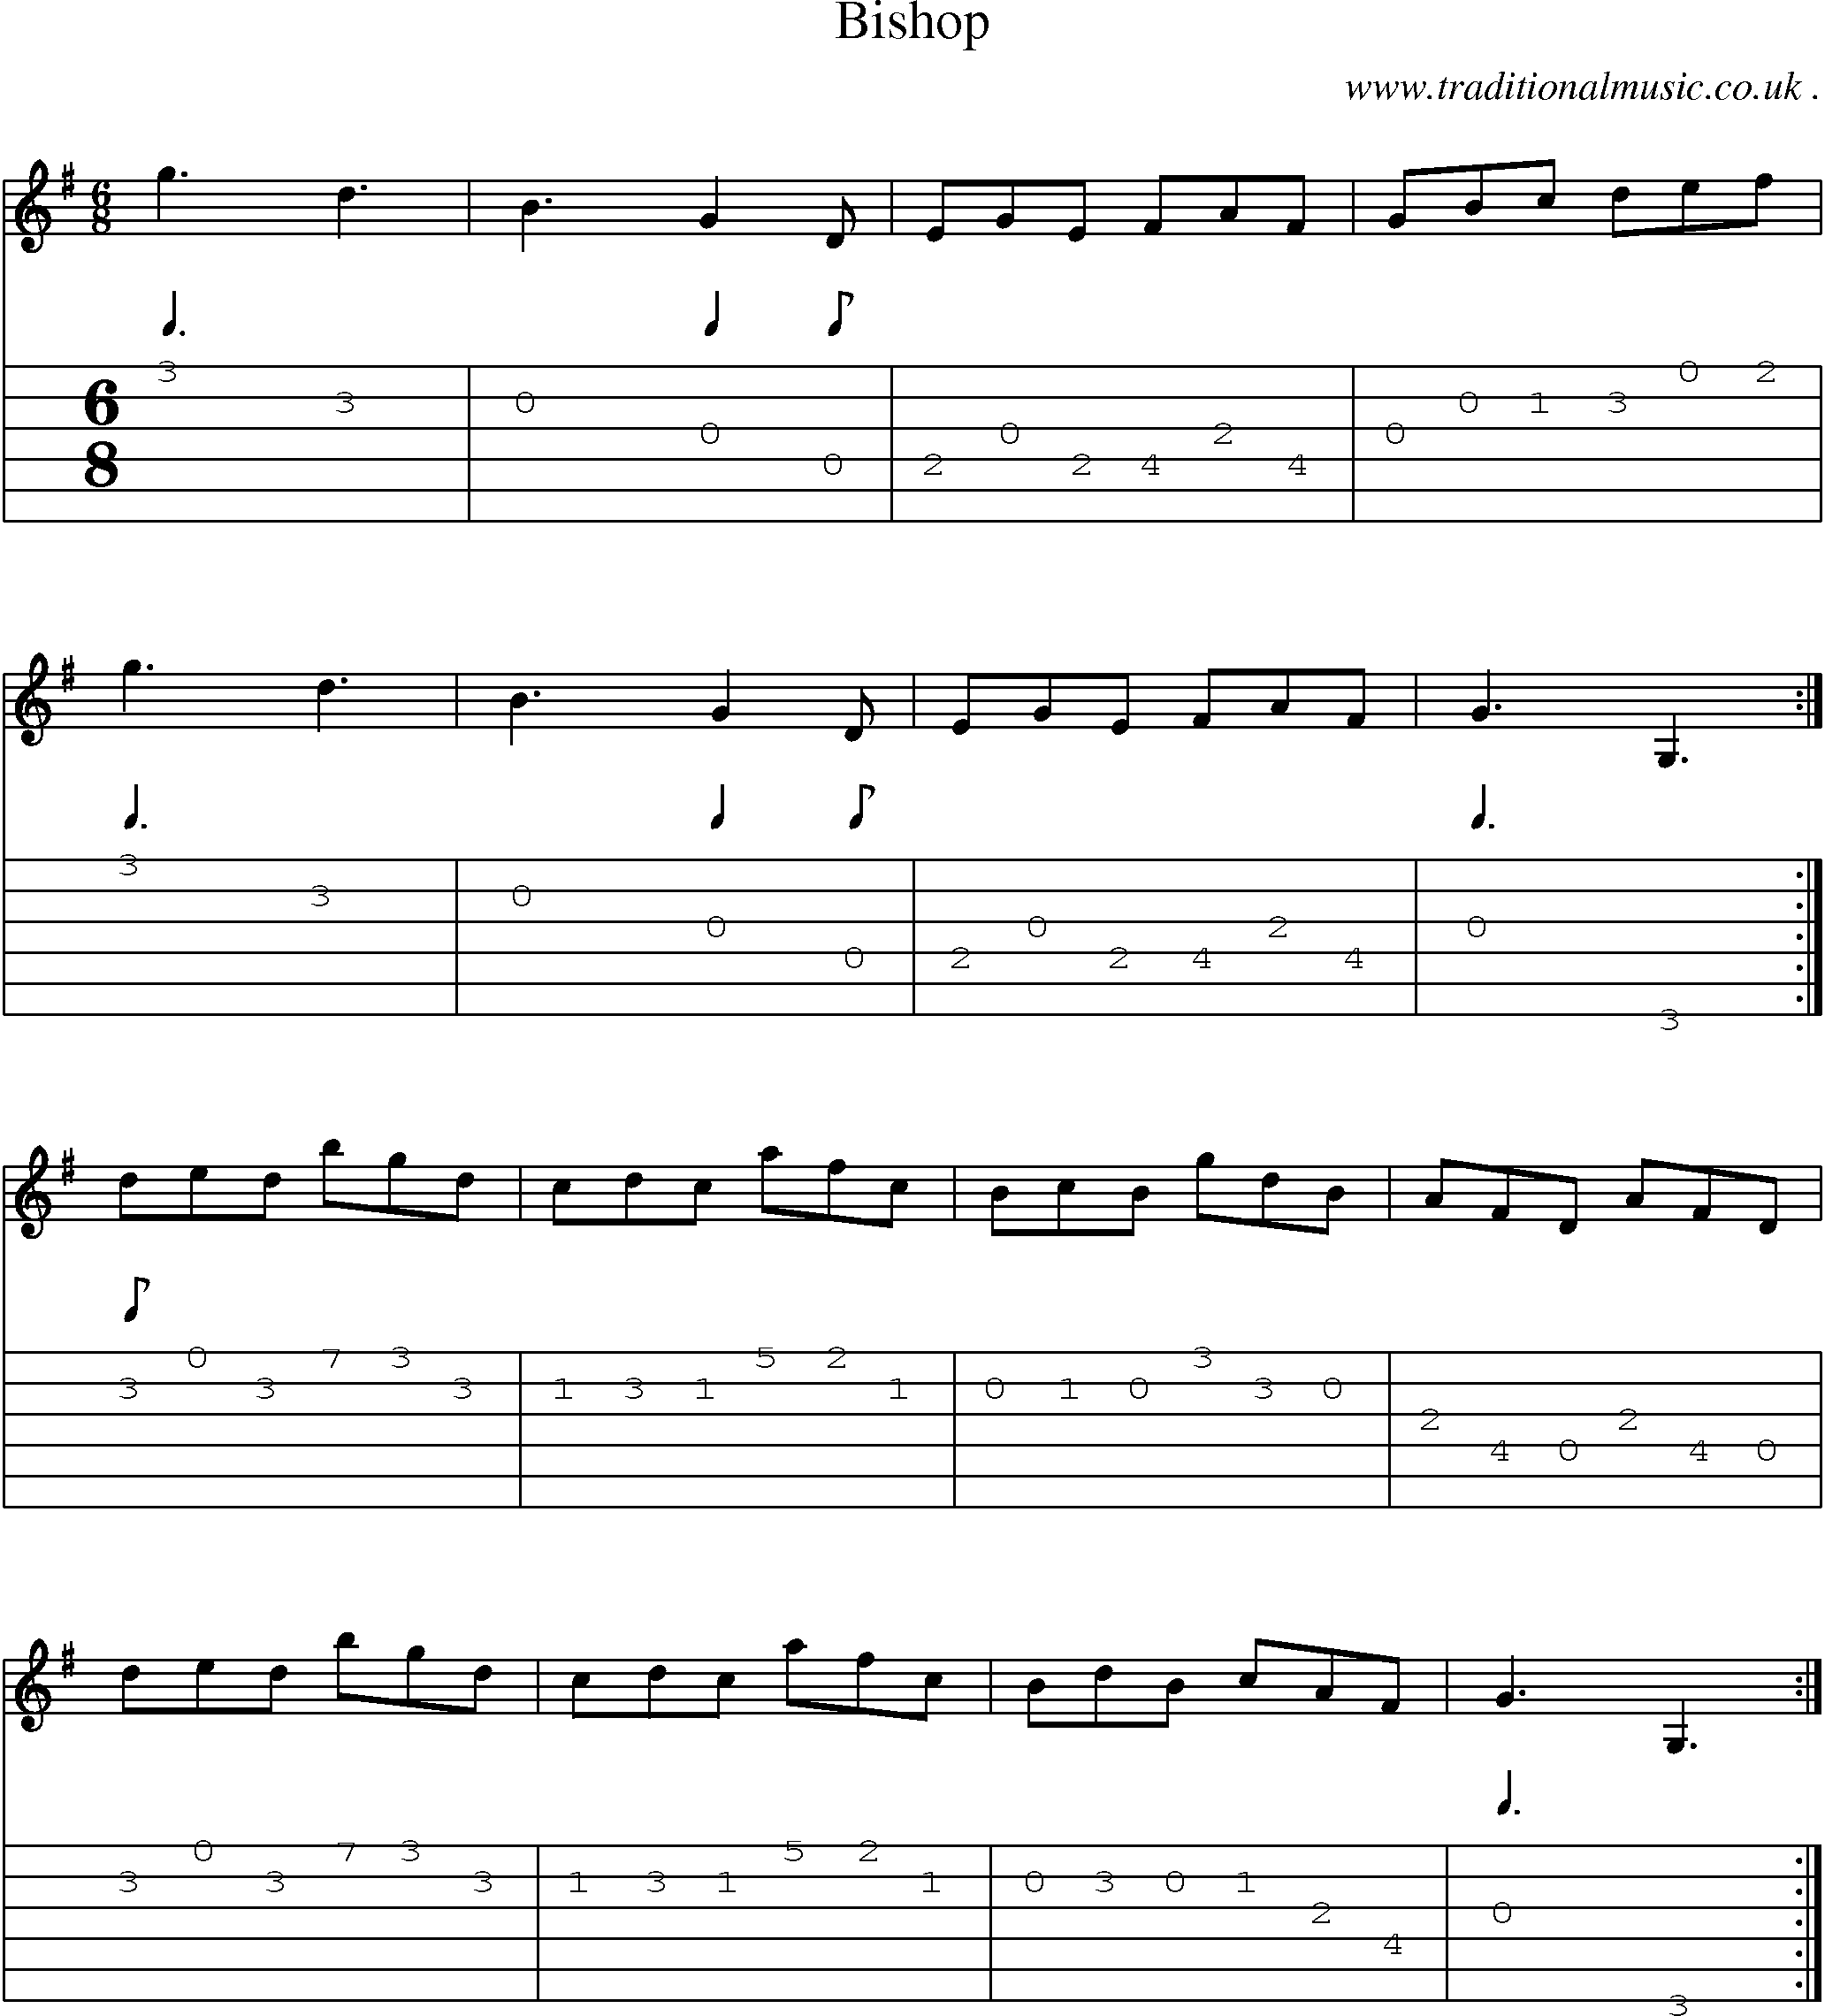 Sheet-Music and Guitar Tabs for Bishop